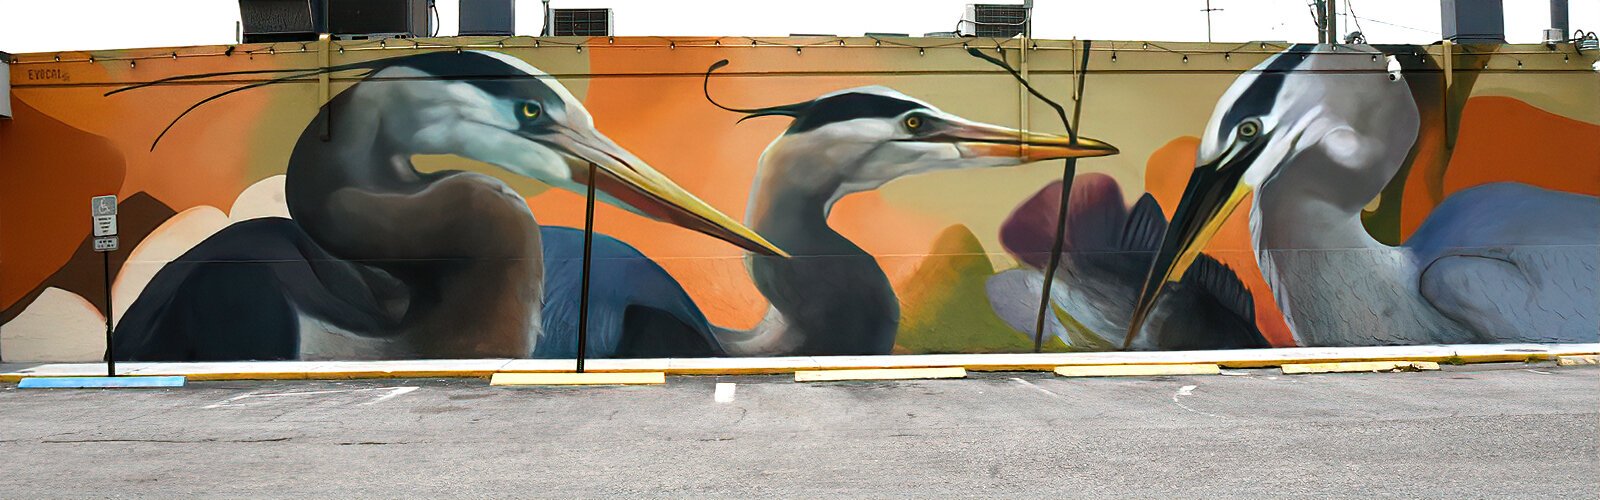 For Clearwater's Art Oasis Mural Festival, Dominican artist Evoca1 painted his “Waltz in Orange and Blue” mural on the wall of Charlie’s Sushi and Japanese Restaurant.